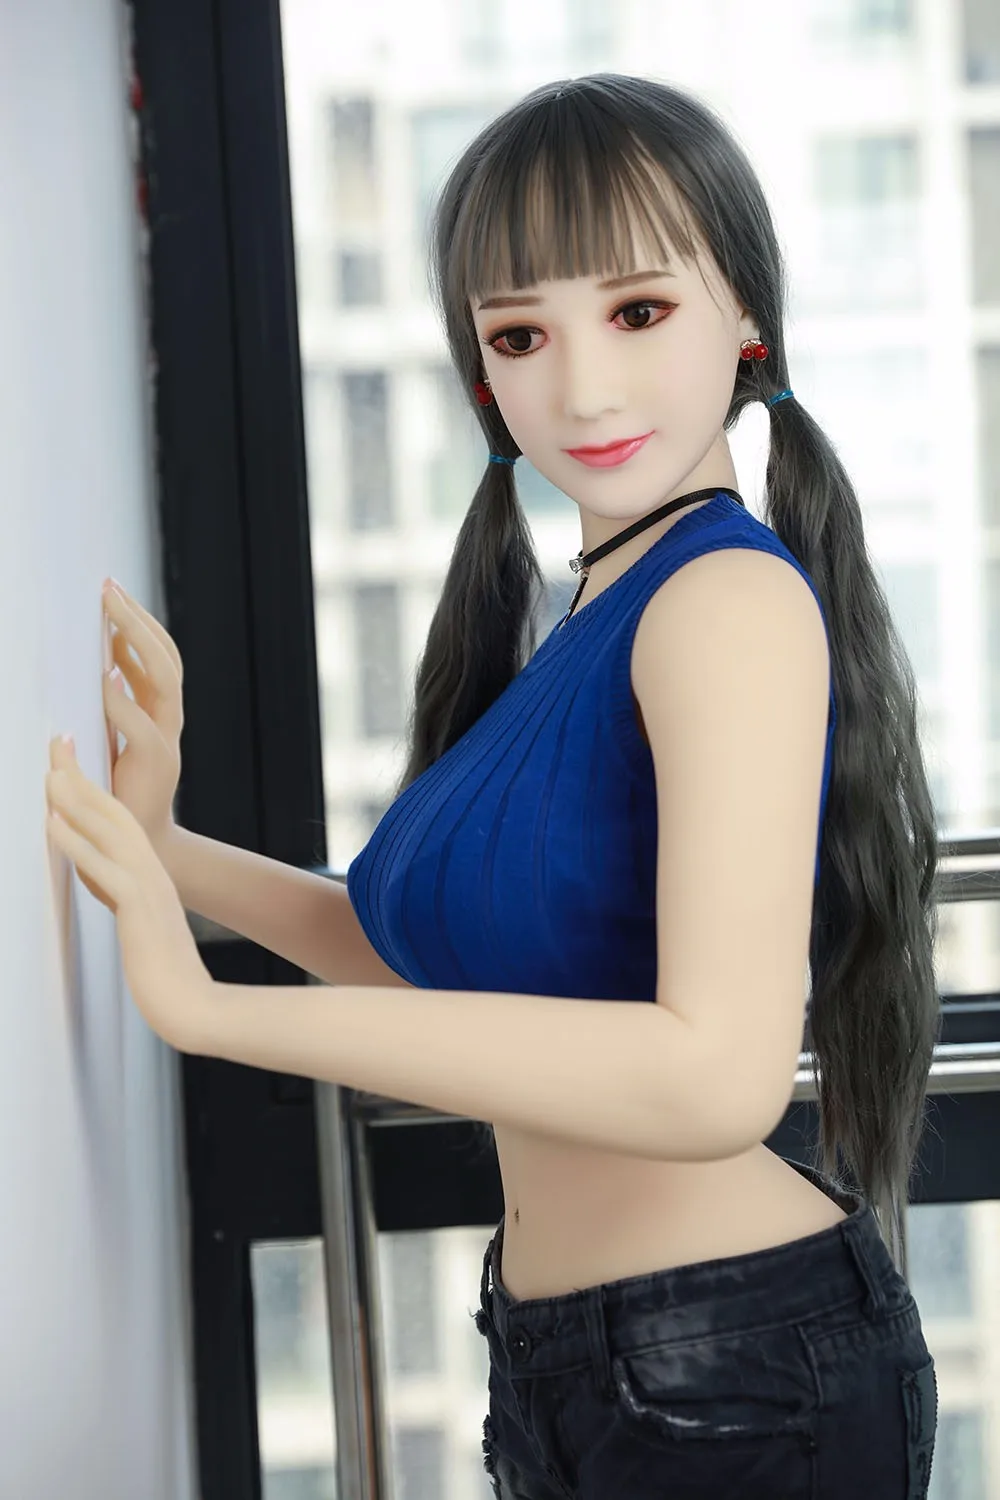 Qcldoll Adult Sex Toy Silicone Dolls Sexplay Doll For Men